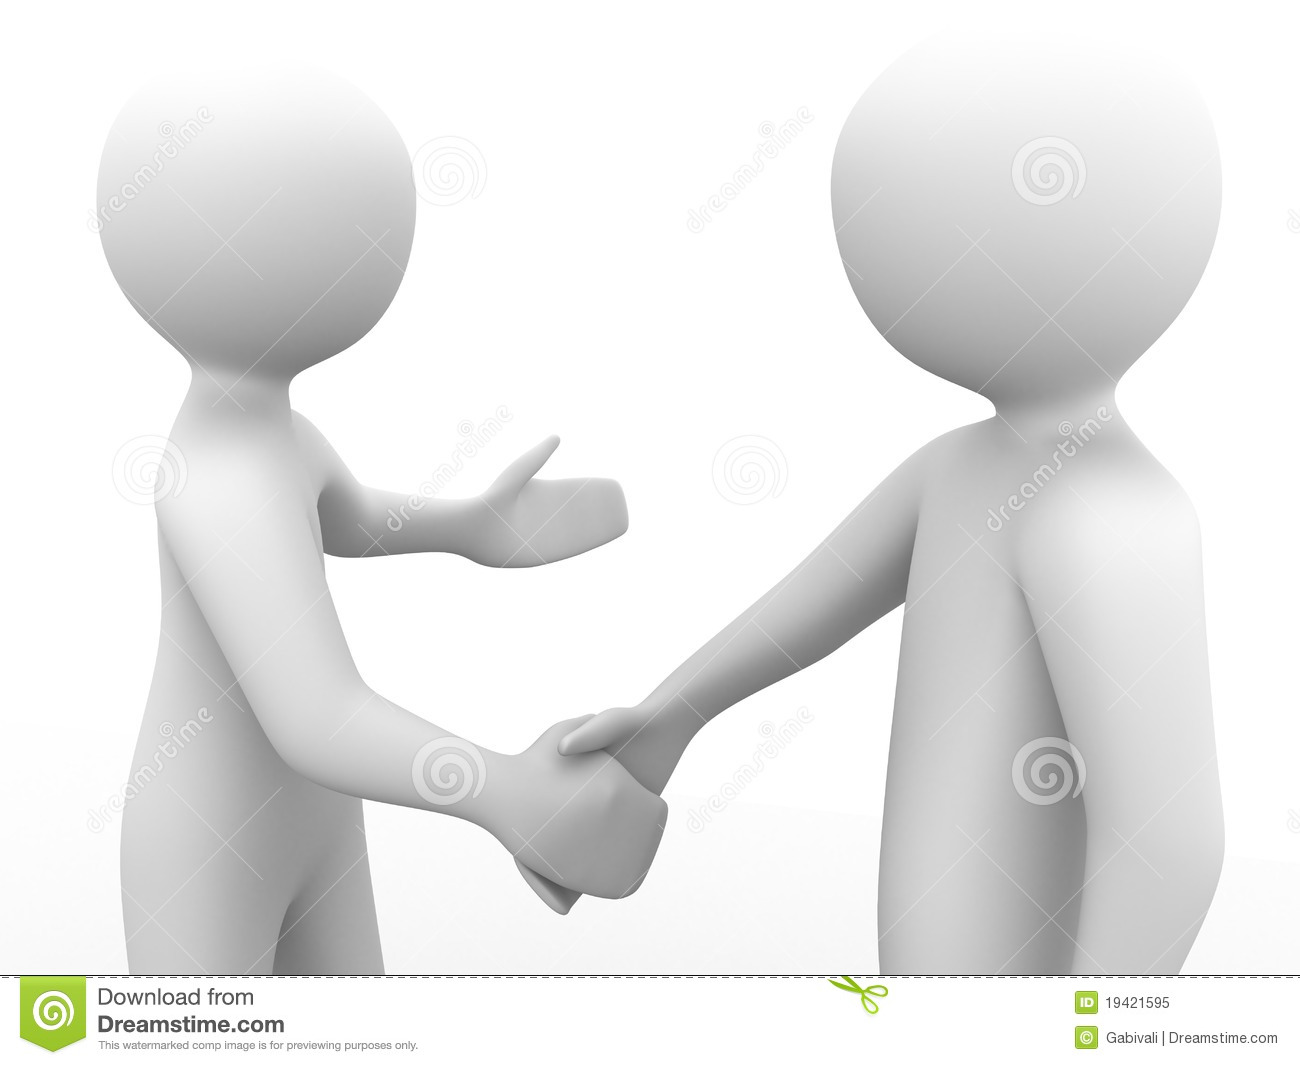 3d People Greeting Each Other With A Handshake